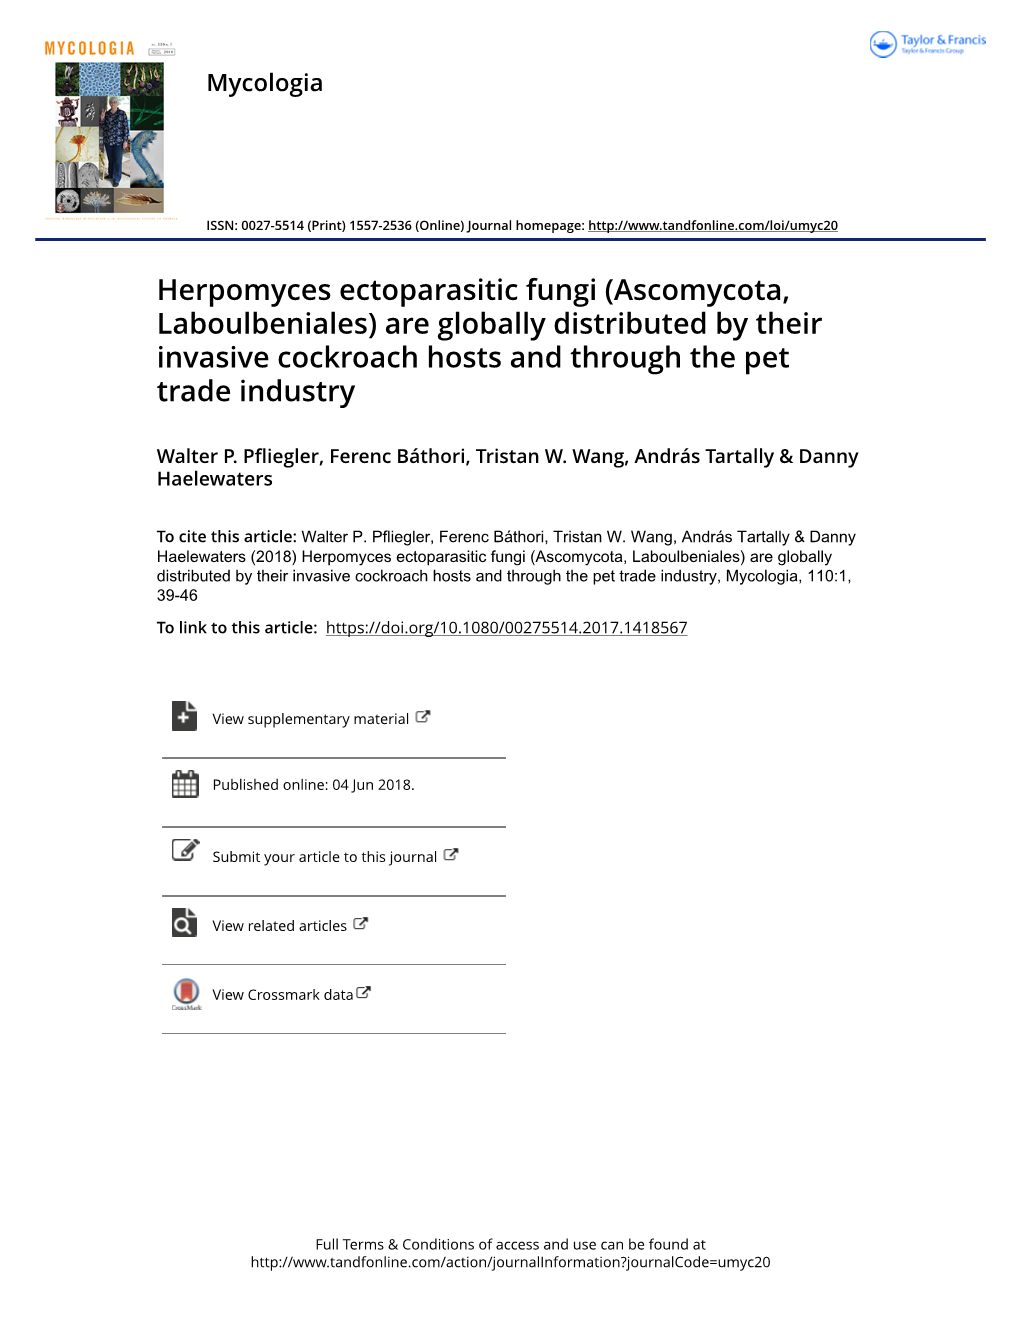 Herpomyces Ectoparasitic Fungi (Ascomycota, Laboulbeniales) Are Globally Distributed by Their Invasive Cockroach Hosts and Through the Pet Trade Industry